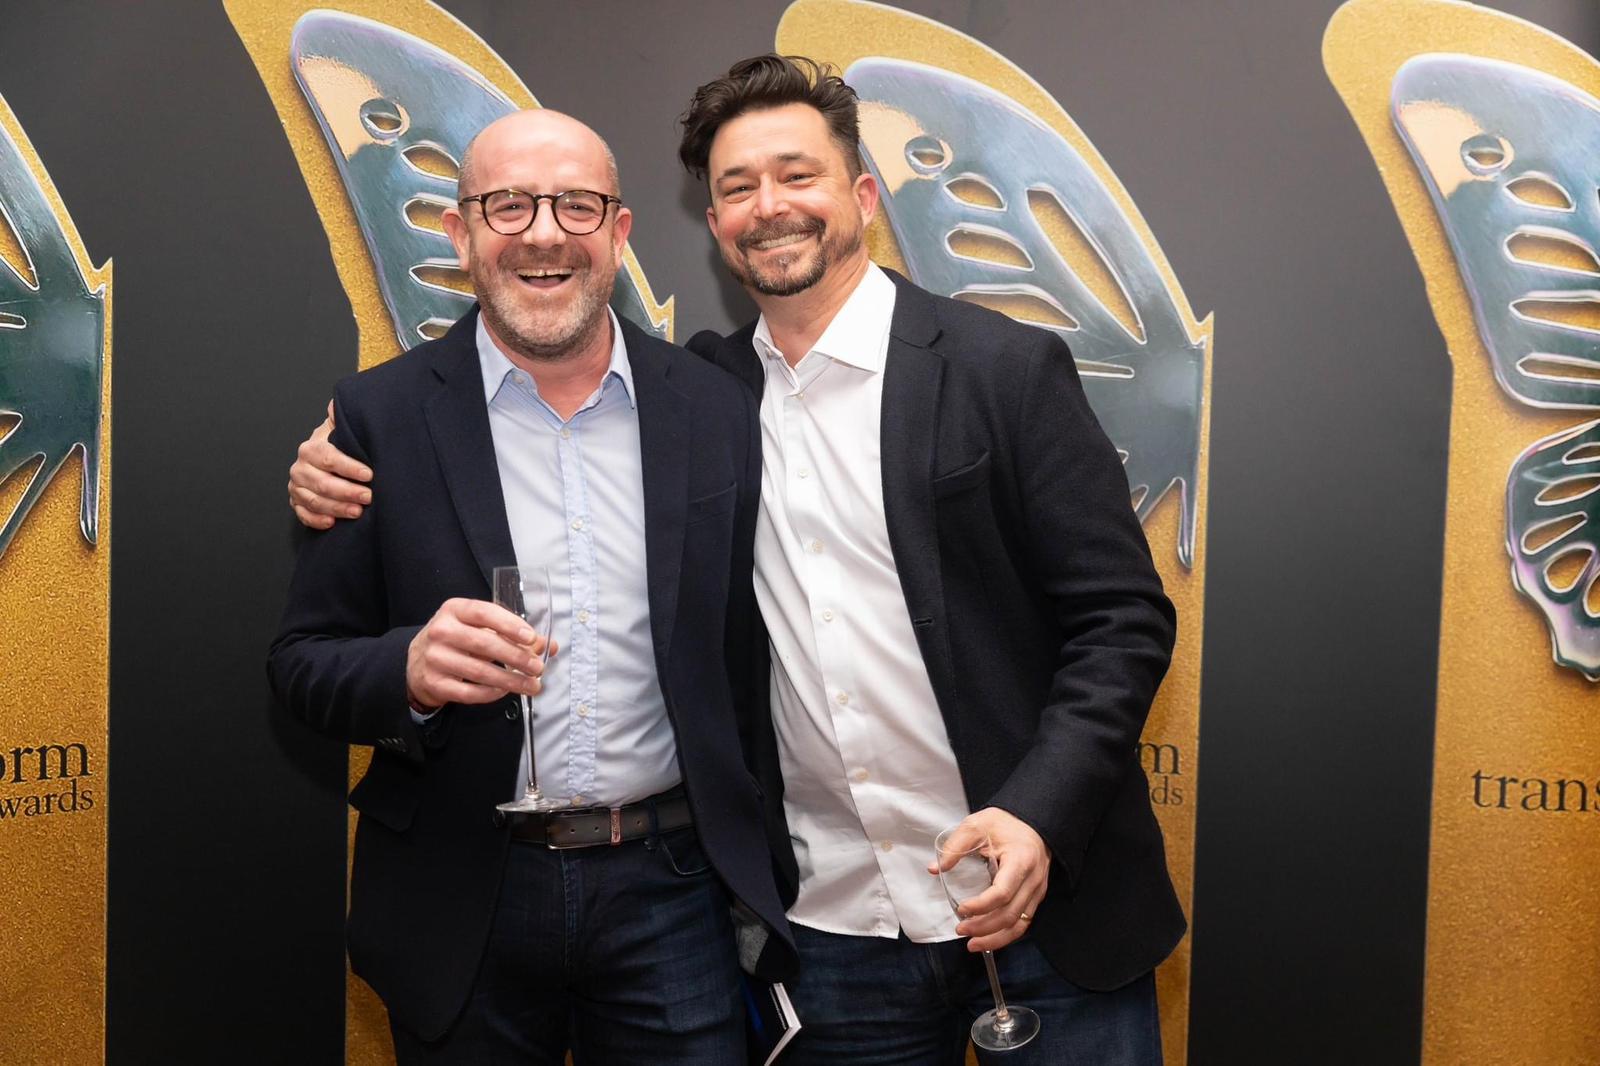 f.r.a. design studio's Jamie Trippier (left) and Wesley Meyer (right) celebrating after their Gold at Transform Awards Europe (22nd March '23) for their work on Borough Yards Southwark